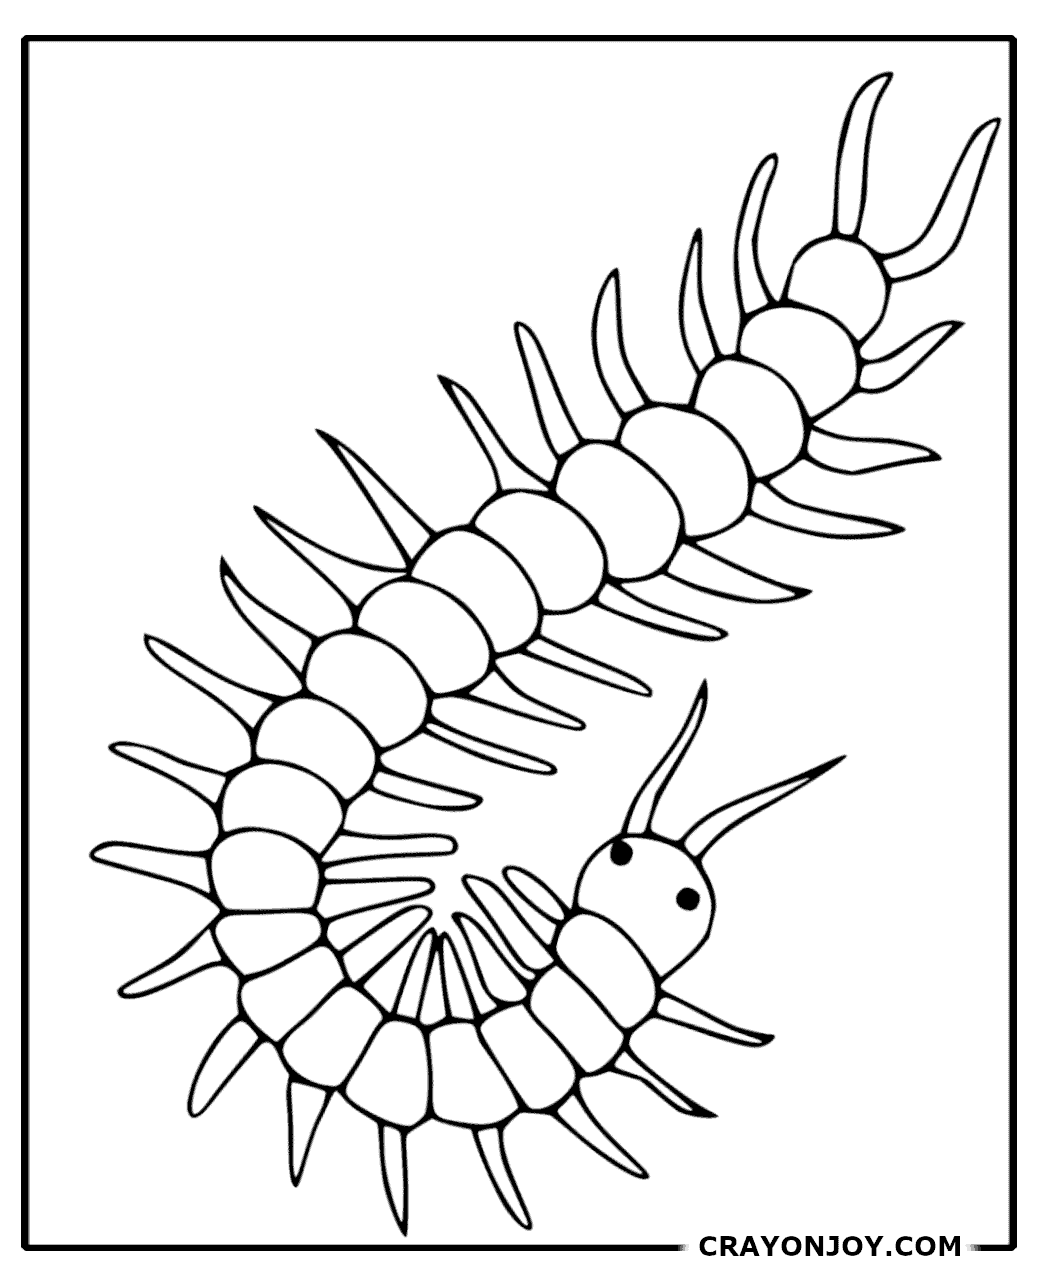 Free Printable Centipede Coloring Pages for Kids & Adults